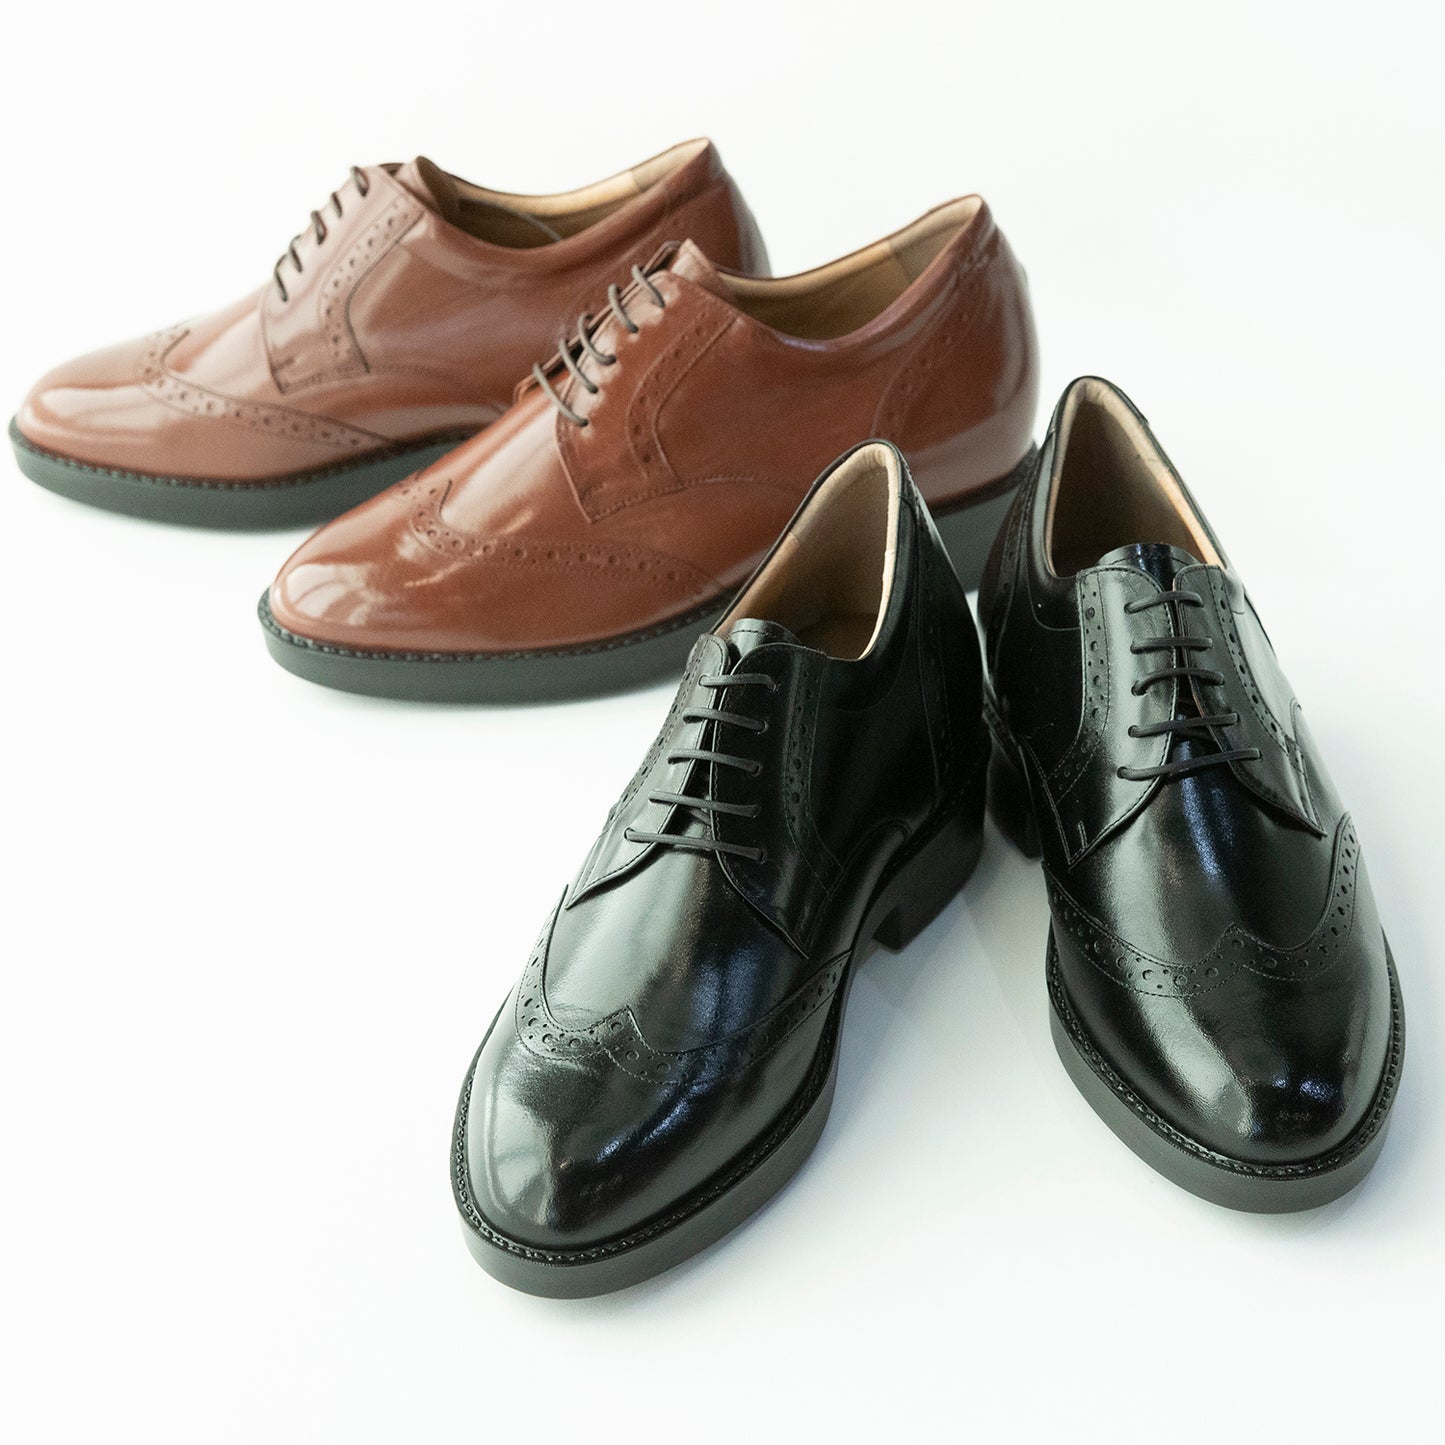 Men's Elevator Shoes Height Increasing 2.76" Taller Wingtip Lace Up Brogue Dress Shoes Kangaroo Leather No. 232